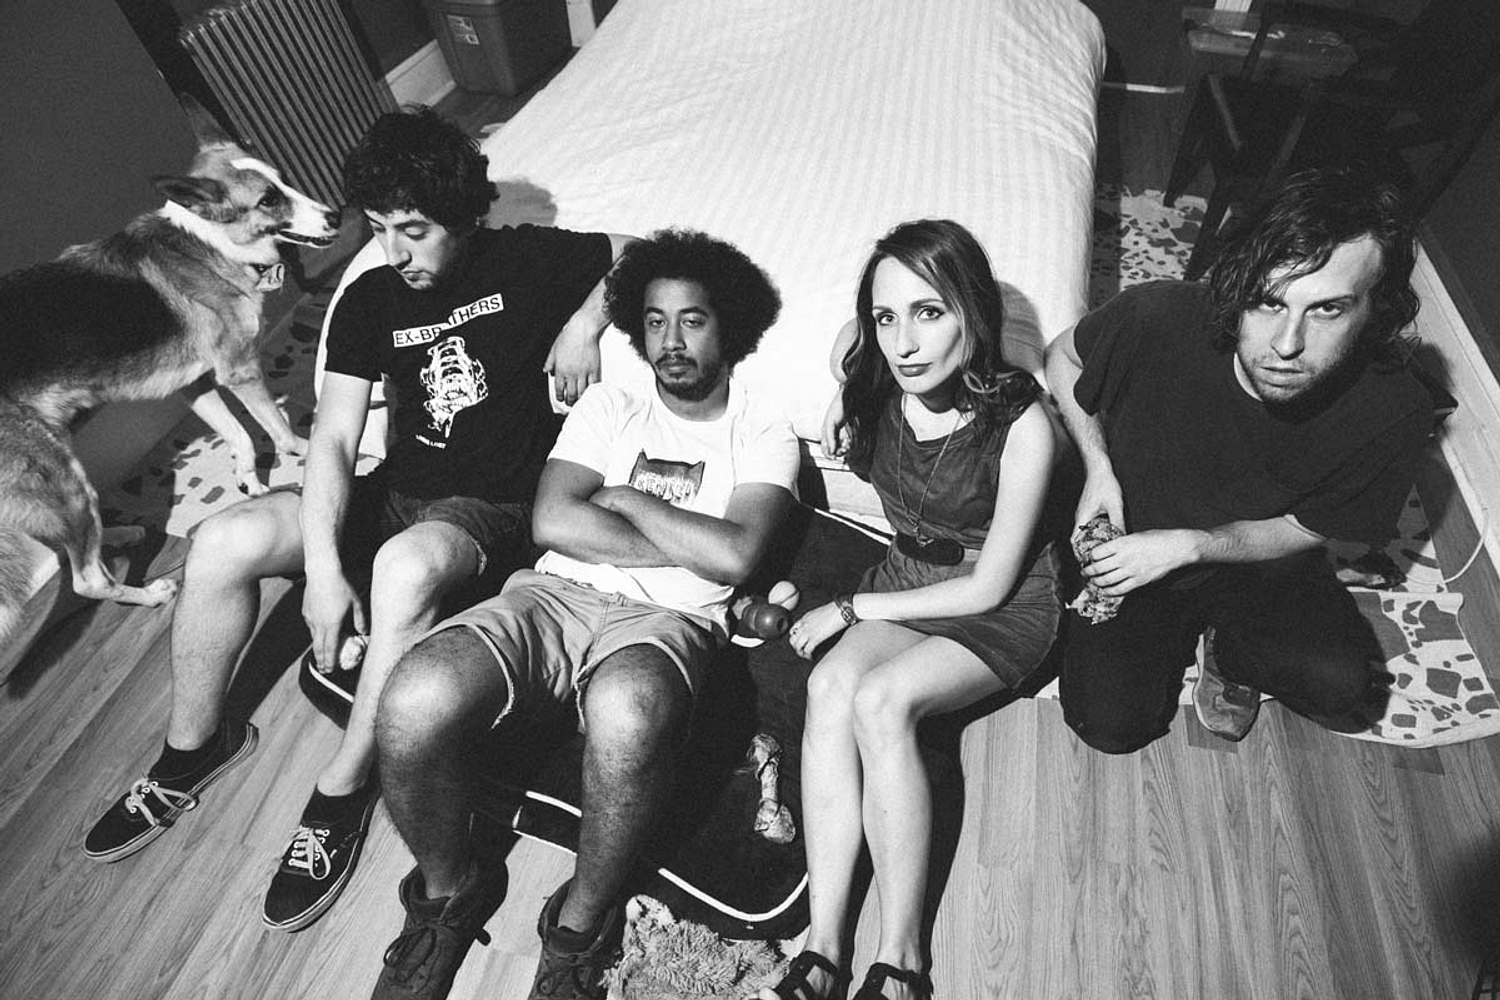 Speedy Ortiz: “I cut out people who were being crappy, so I didn’t have them to write about”